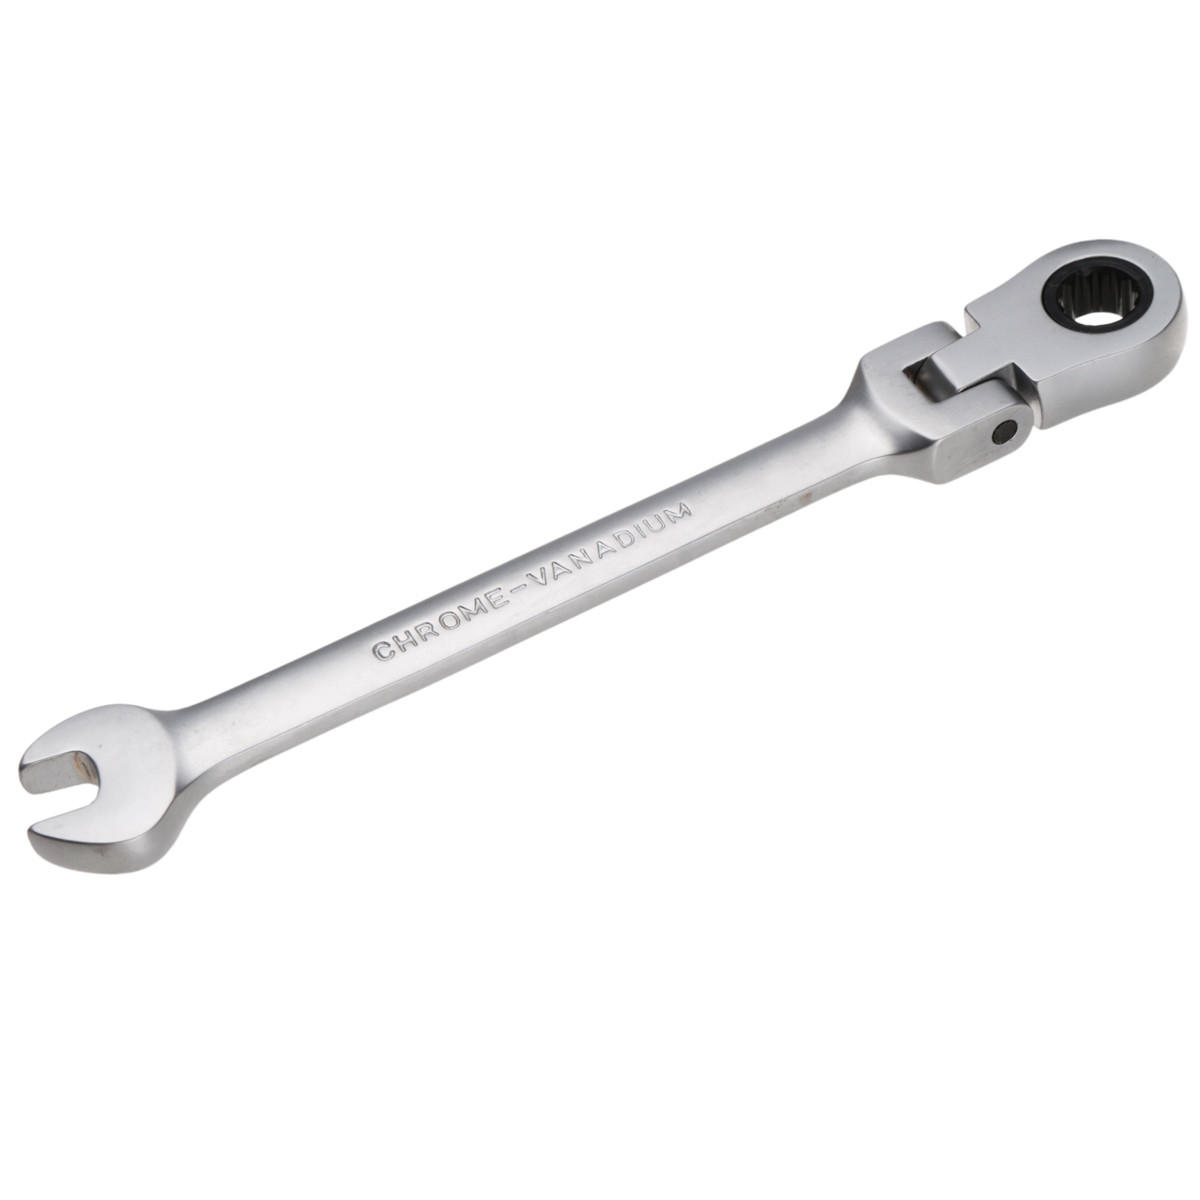 

8mm Reversible Flexible Head Ratchet Ratcheting Spanner Wrench Socket Wrenches Nut Tool for Home&Garden